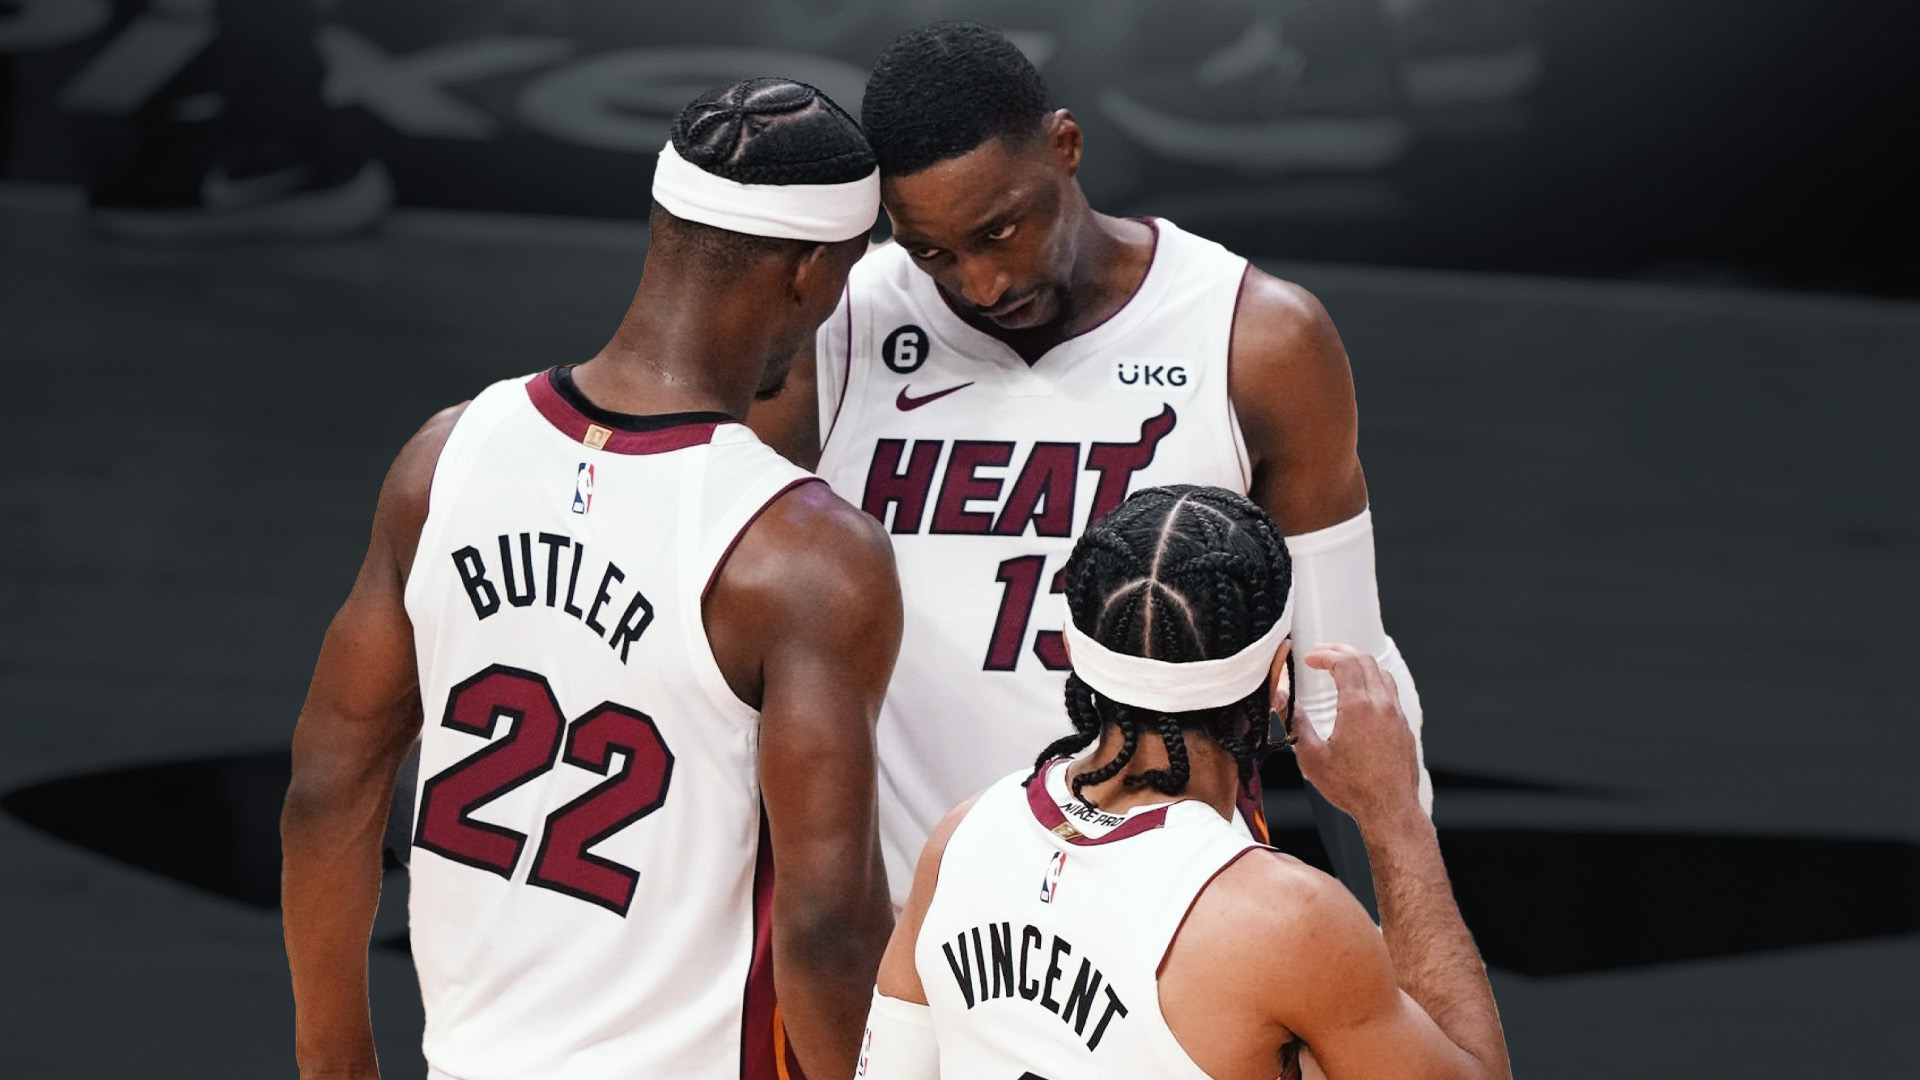 Some NBA Execs Believe Miami’s Finals Run Was Just a Fluke